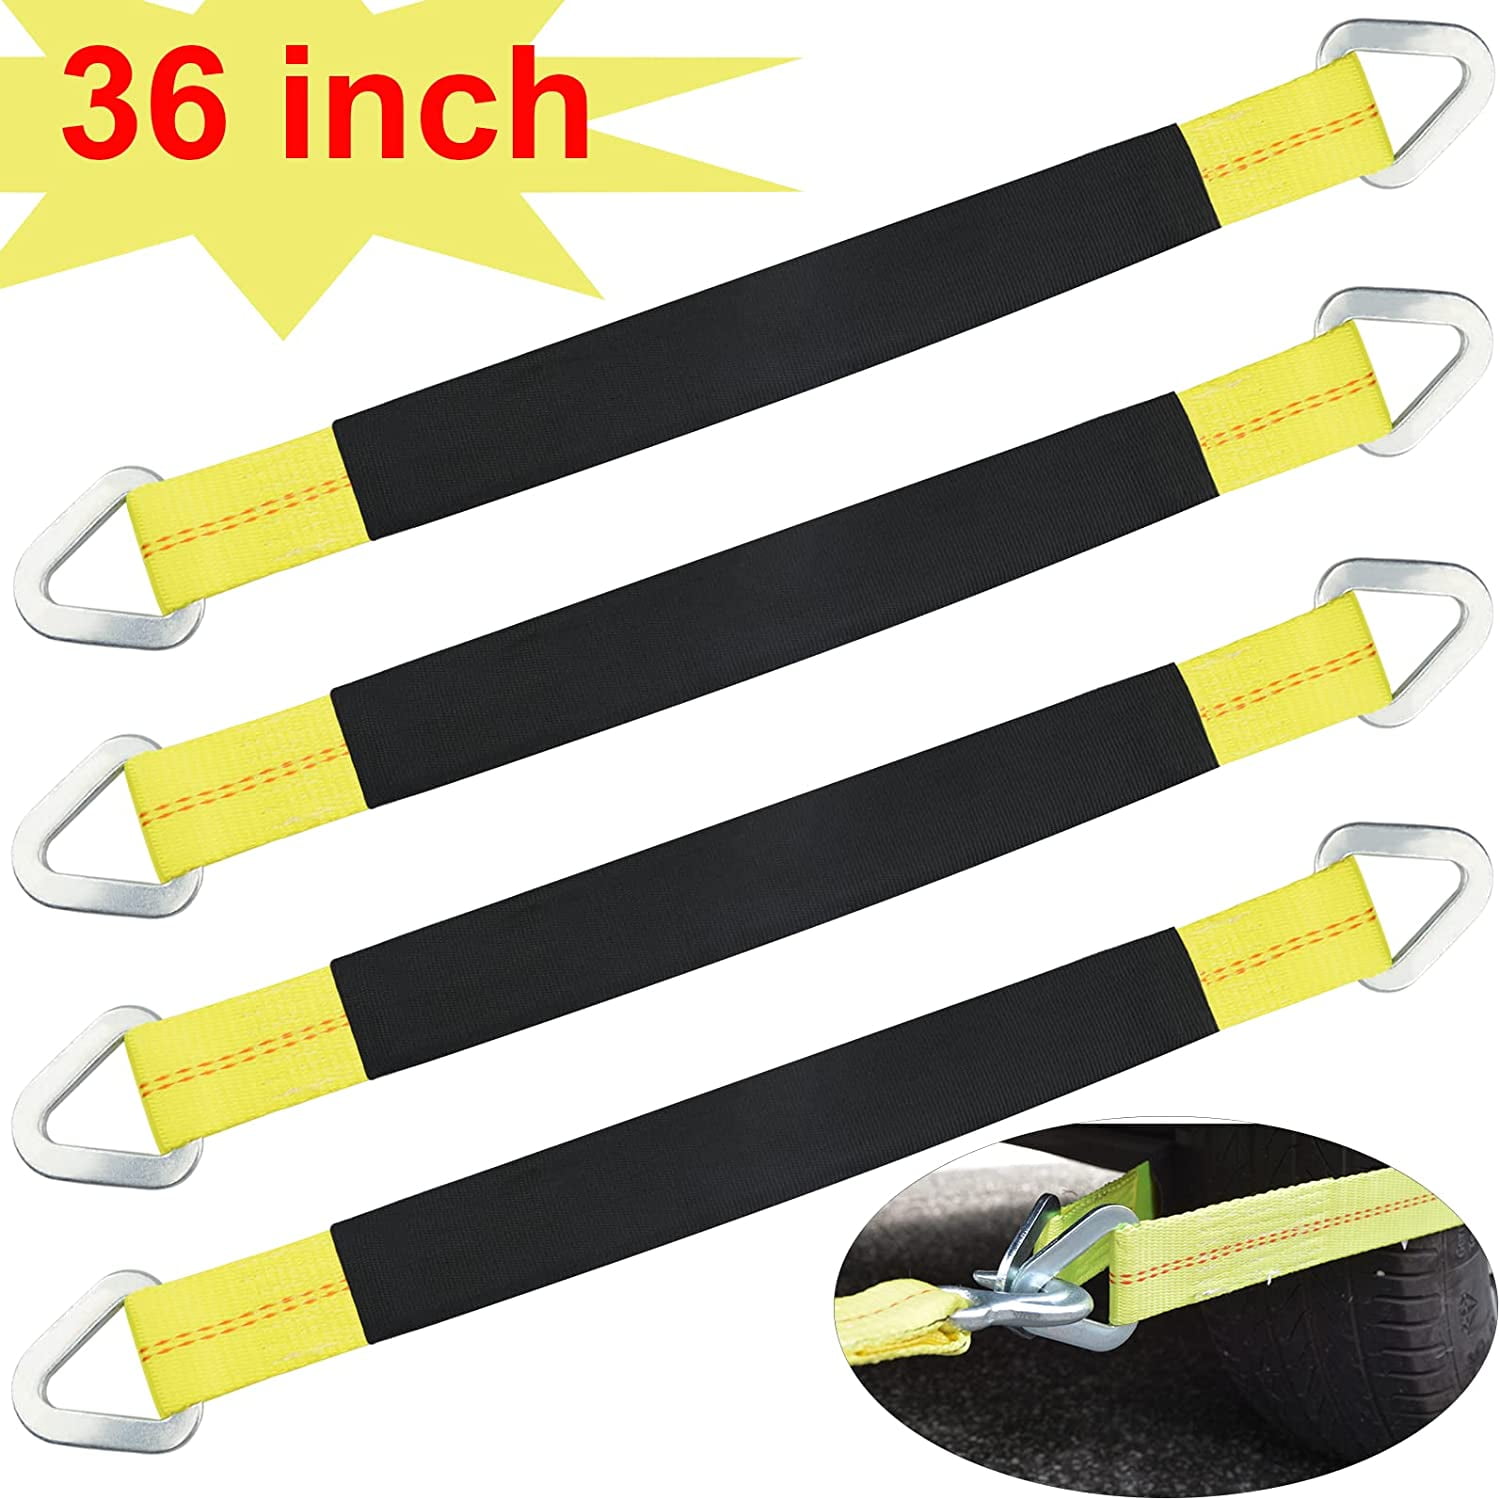 3333 Lb XSTRAP STANDARD 4 Pack of 36 x 2 Axle Strap with Protective Sleeve and D-Ring for Securing Car Transport Axle Tie Down Straps Capacity 10,000 Breaking Strength 